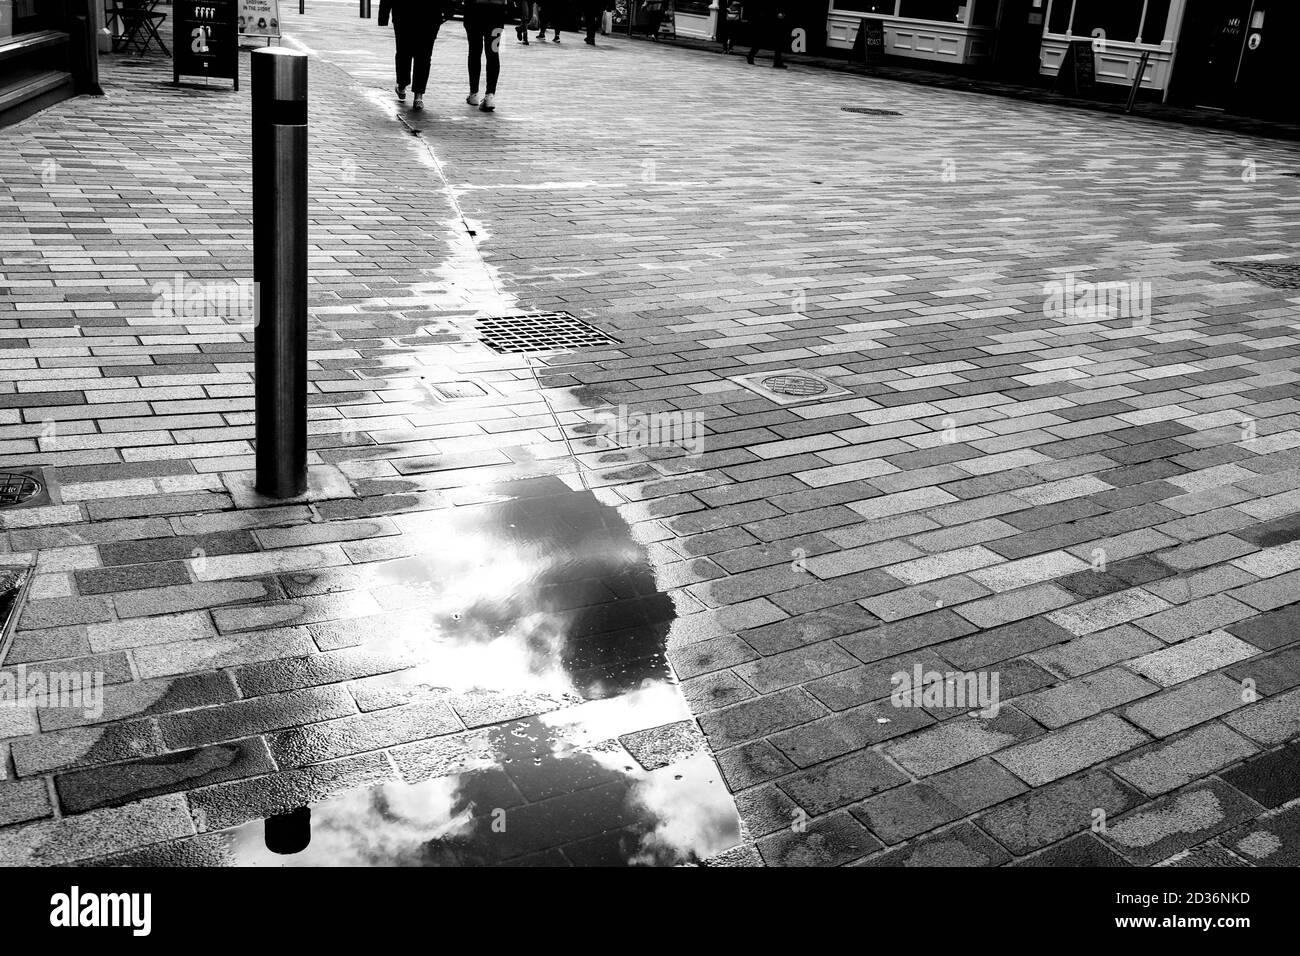 Two People Walking In The Distance On A pavement With Standing Water Puddles Reflection of Clouds in the Sky Stock Photo